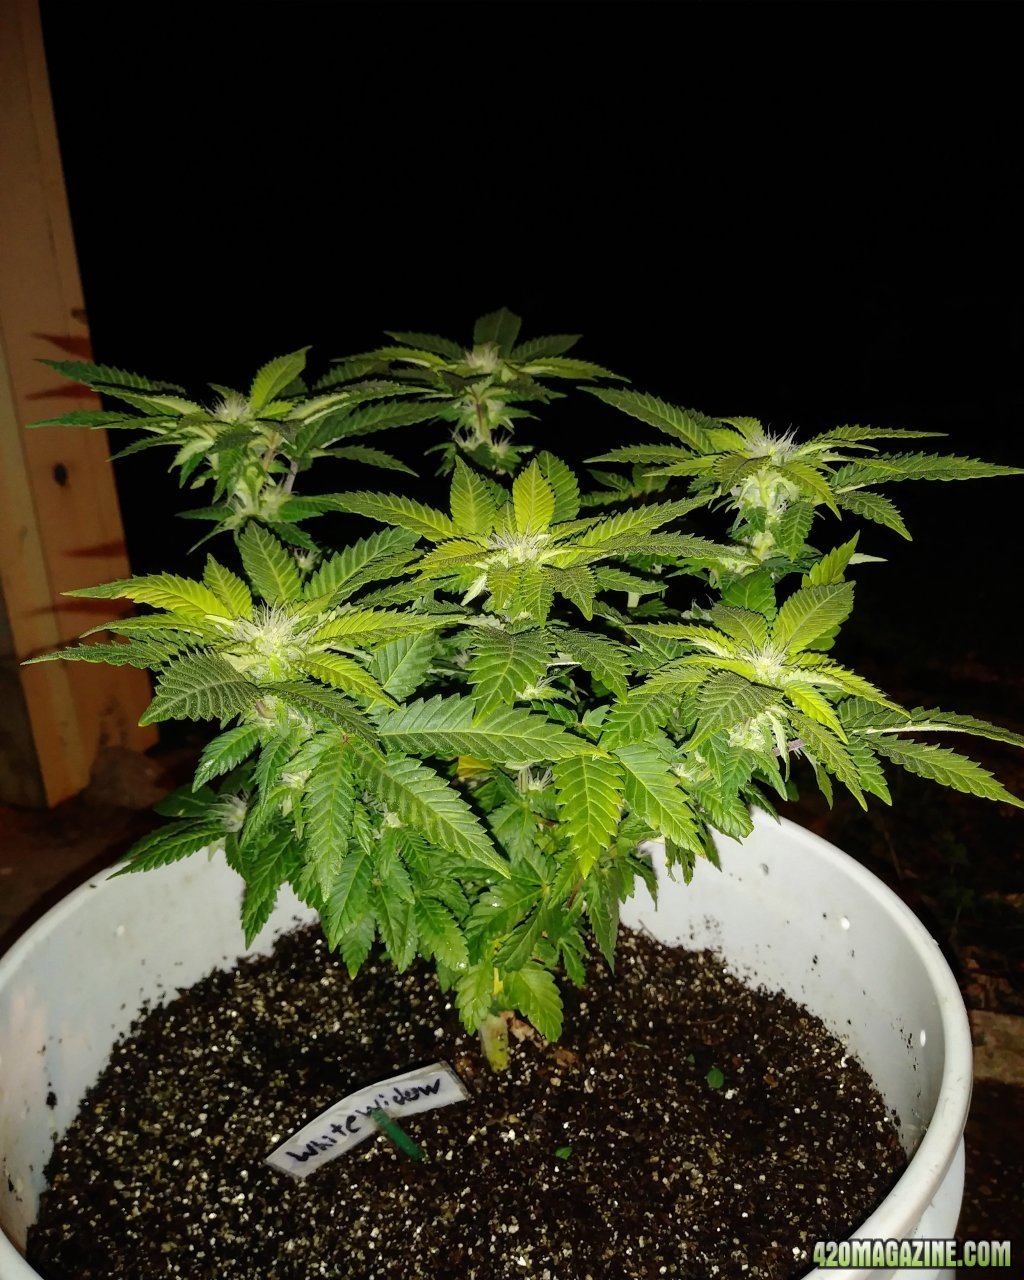 Widow#1 /61 days old 12 th of flower